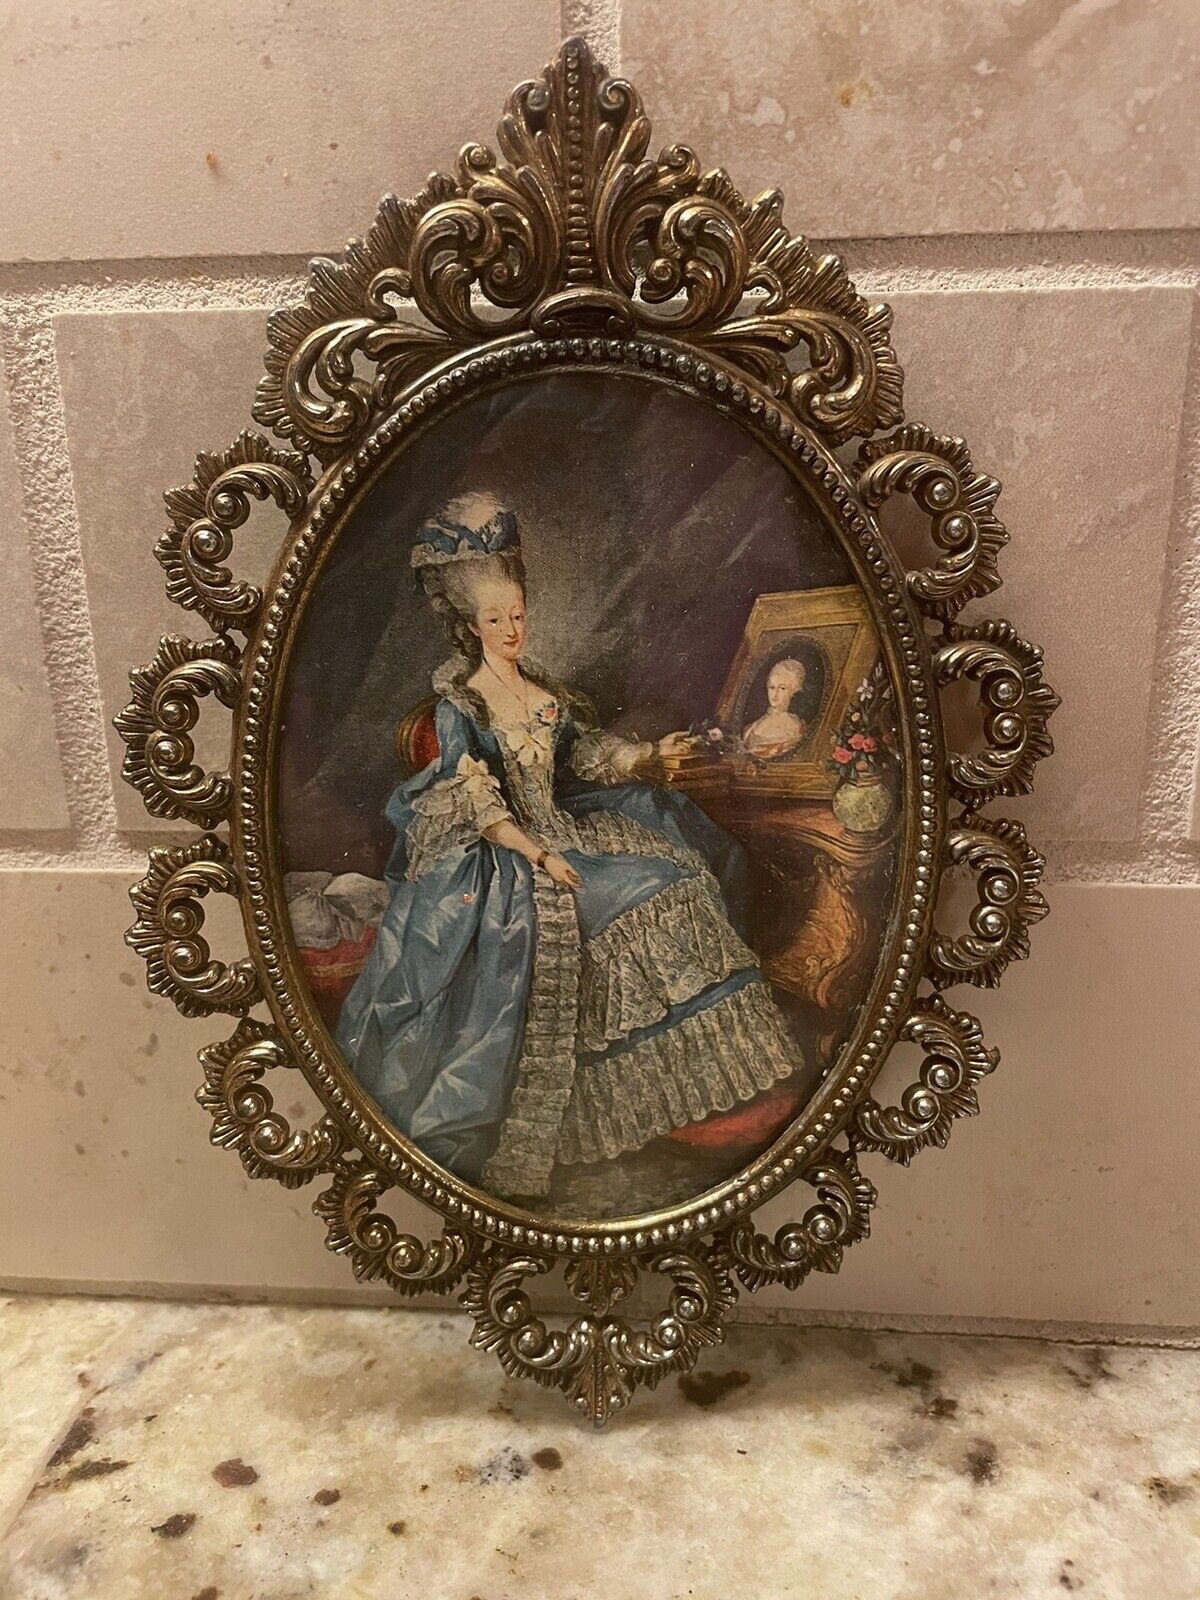 Vintage Ornate Italian Oval Frame Brass Filigree With Victorian Woman